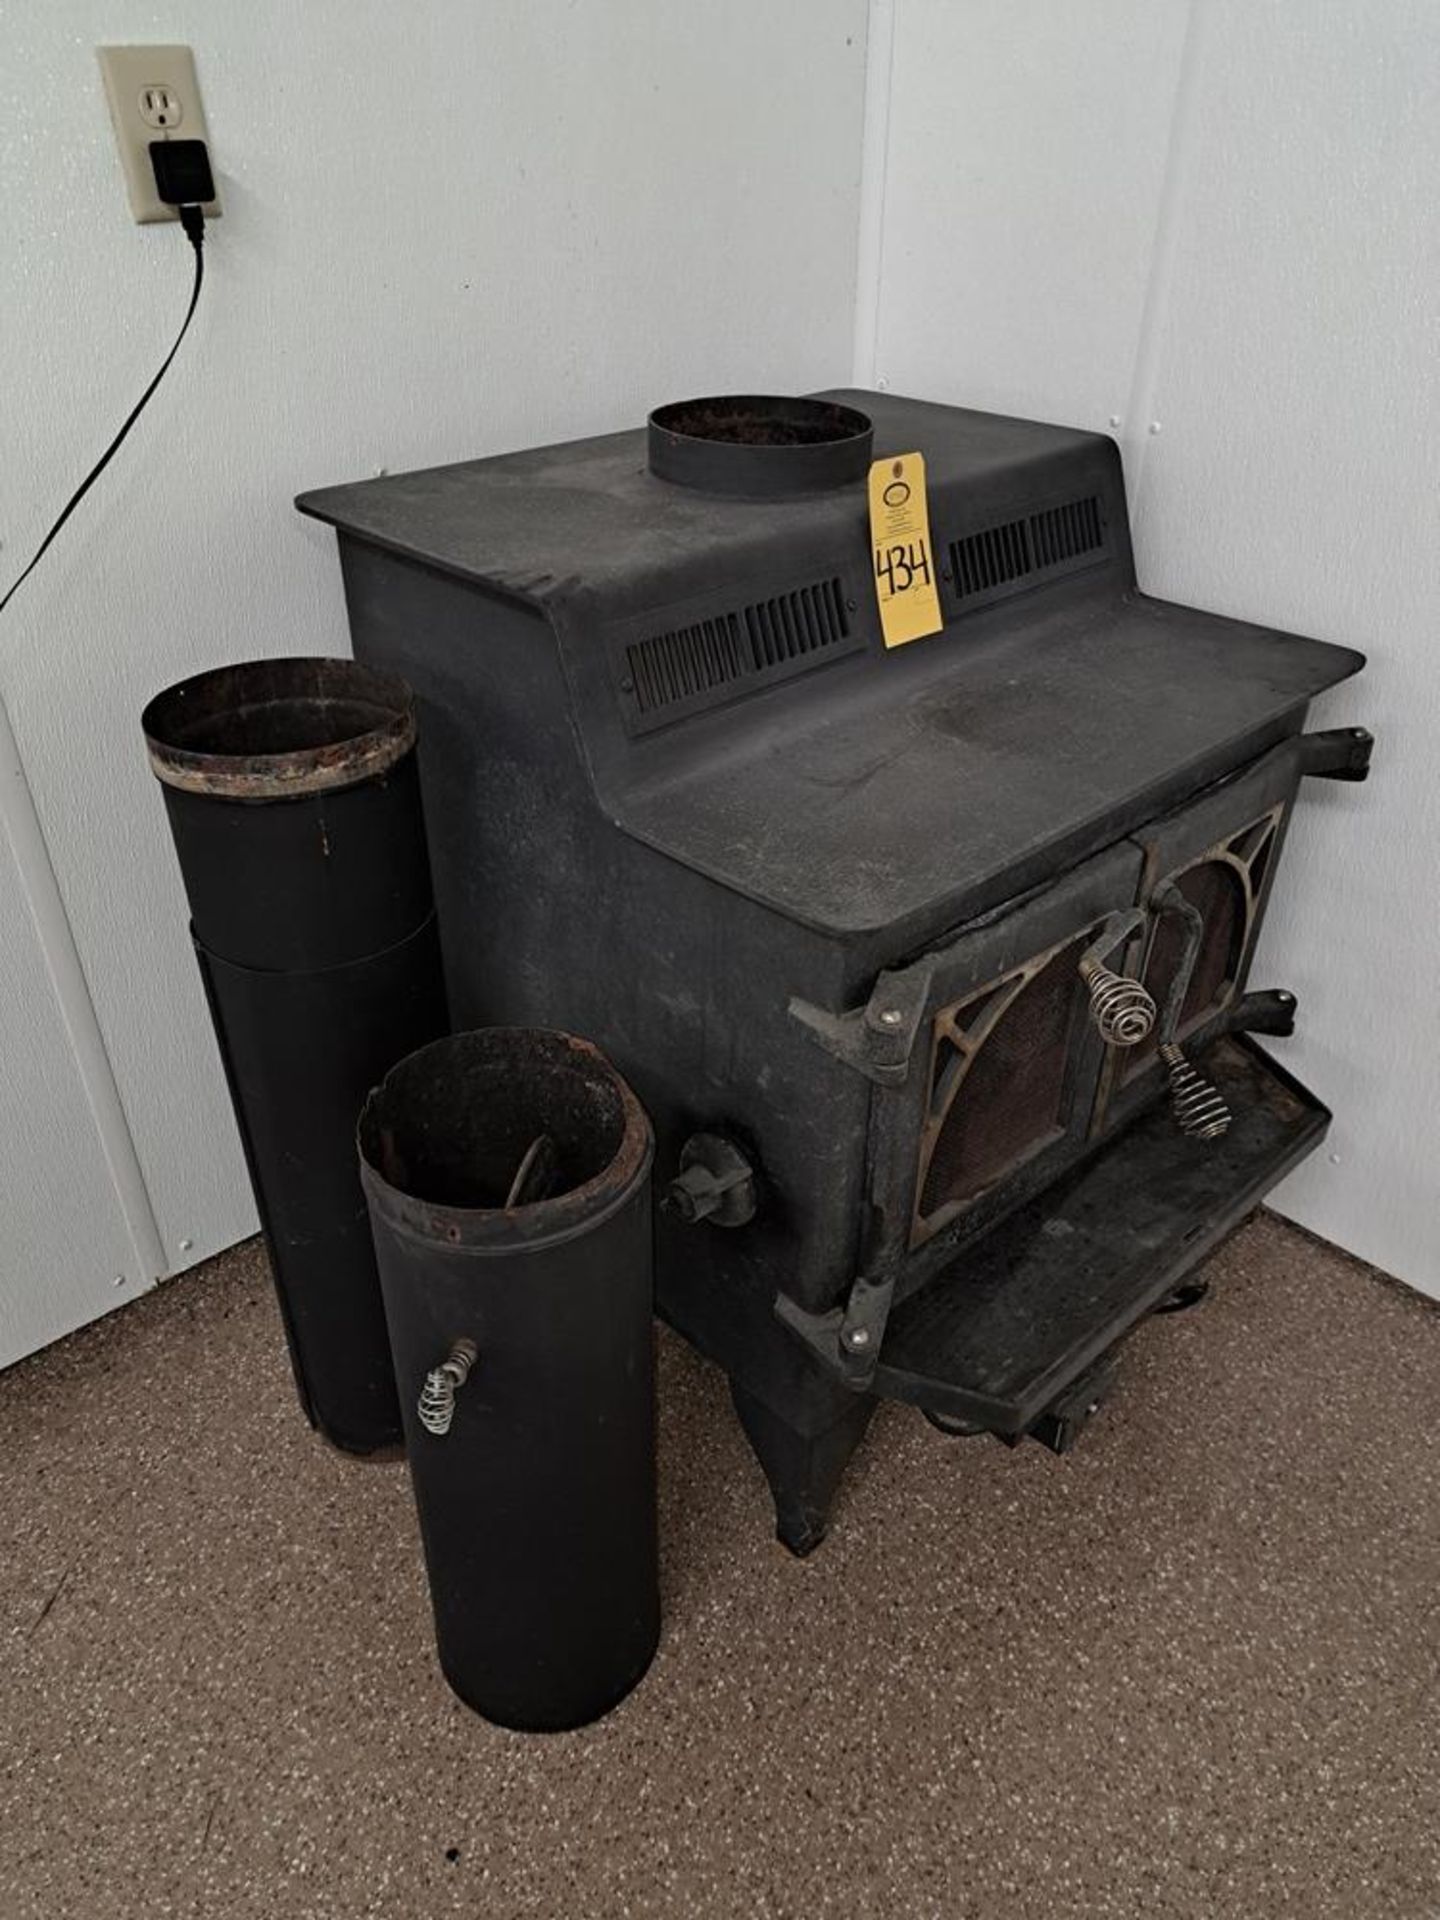 Wood Burning Stove, 30" wide X 32" deep X 36" tall (Required Loading Fee: $50.00) NO HAND CARRY ( - Image 4 of 4